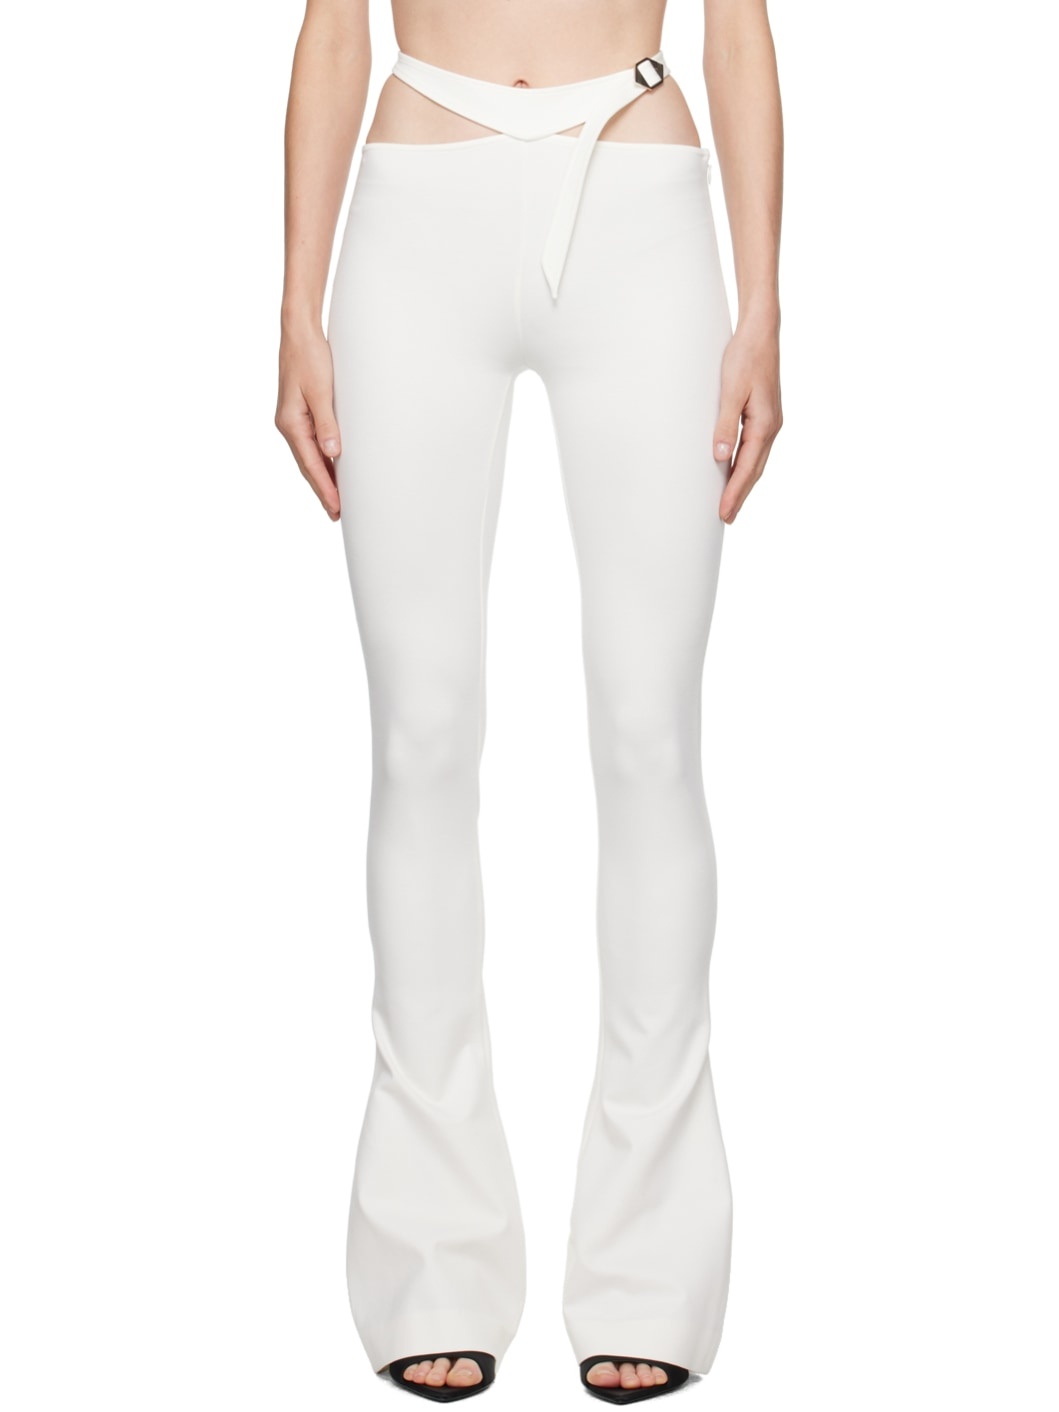 Off-White Pin-Buckle Pants - 1